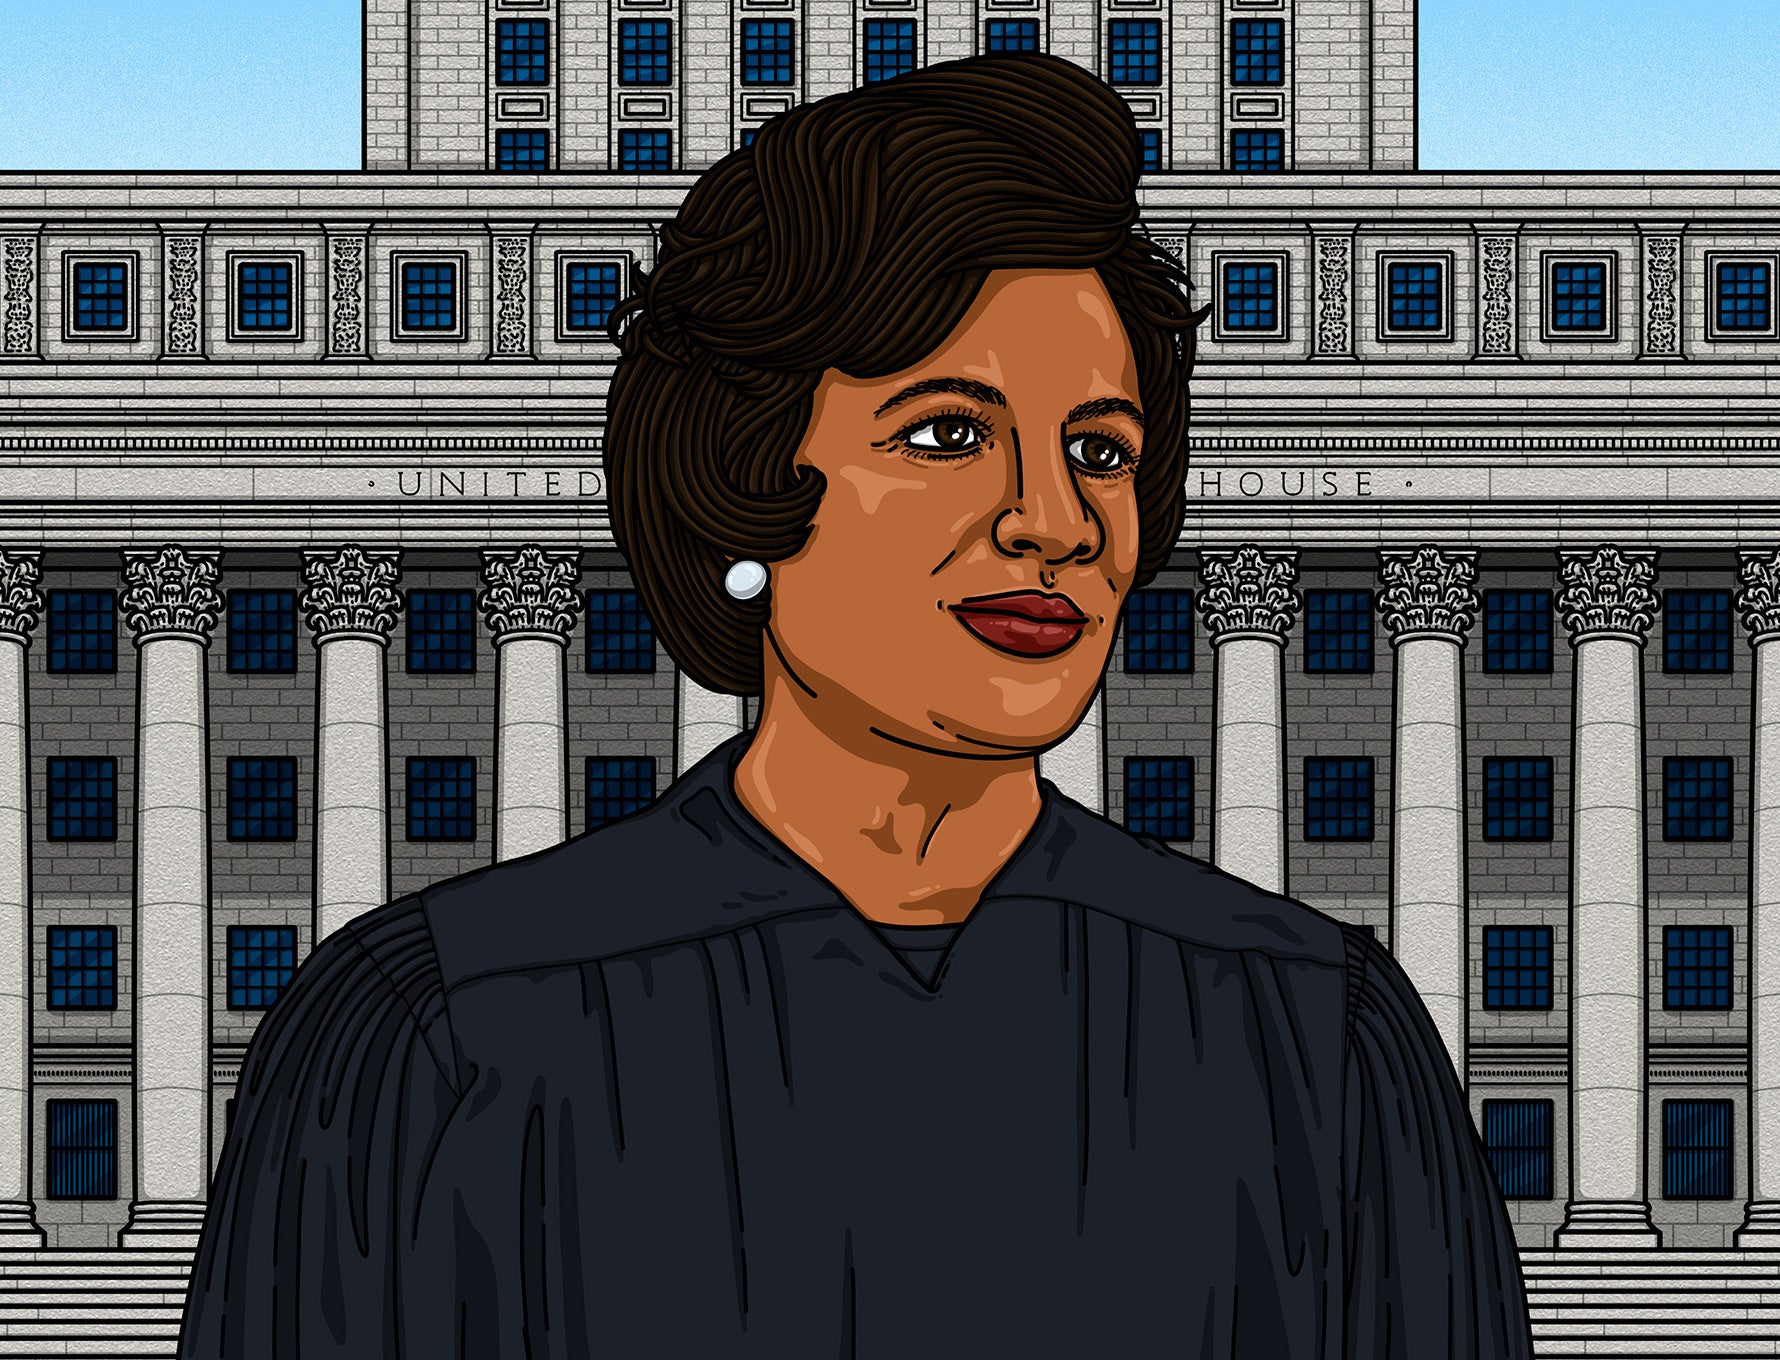 An illustration of a wearing a black judges robe standing in front of a courthouse